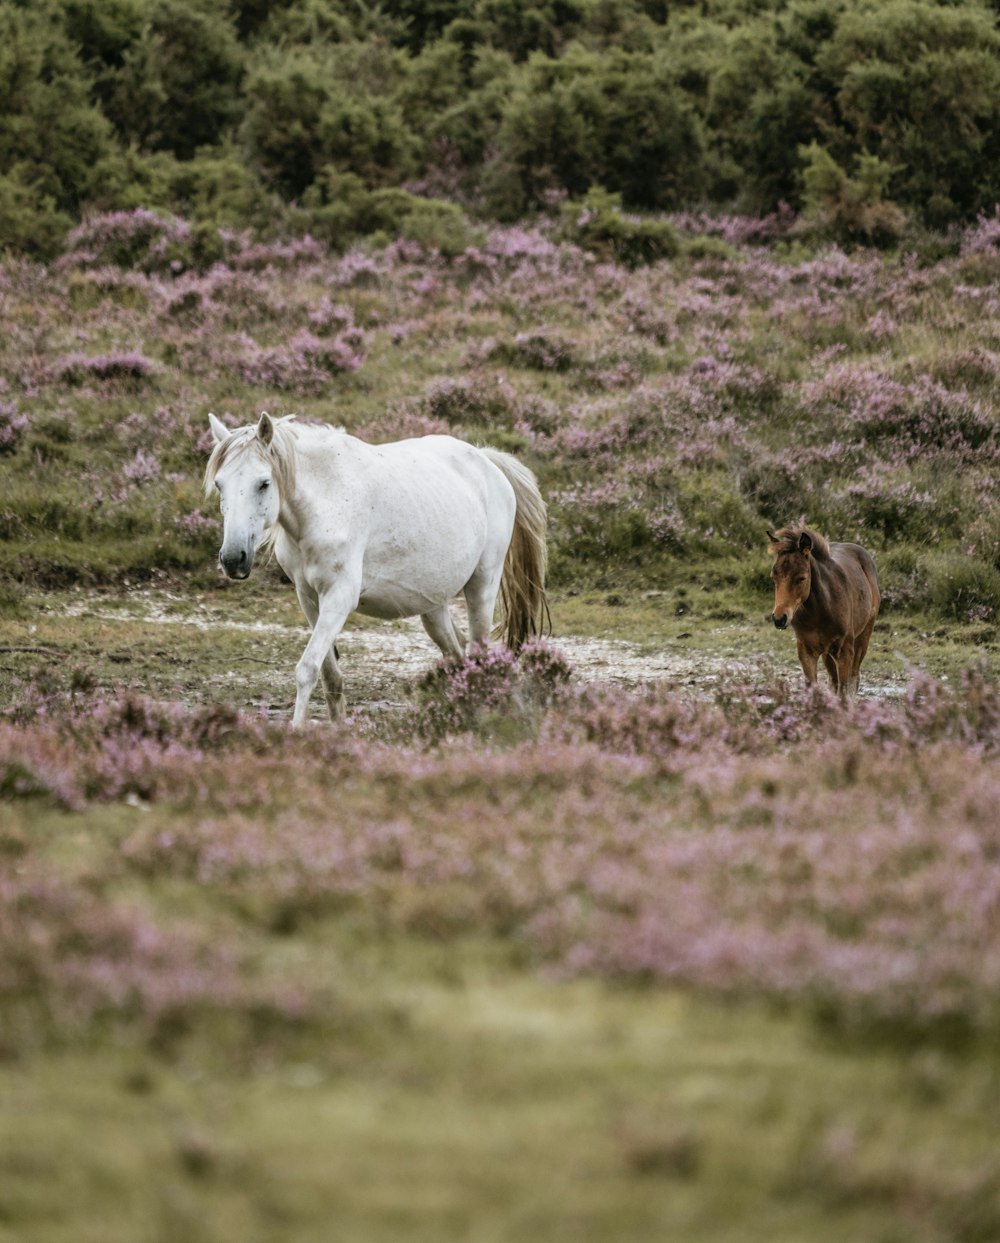 white horse and brown pony walking on grass field